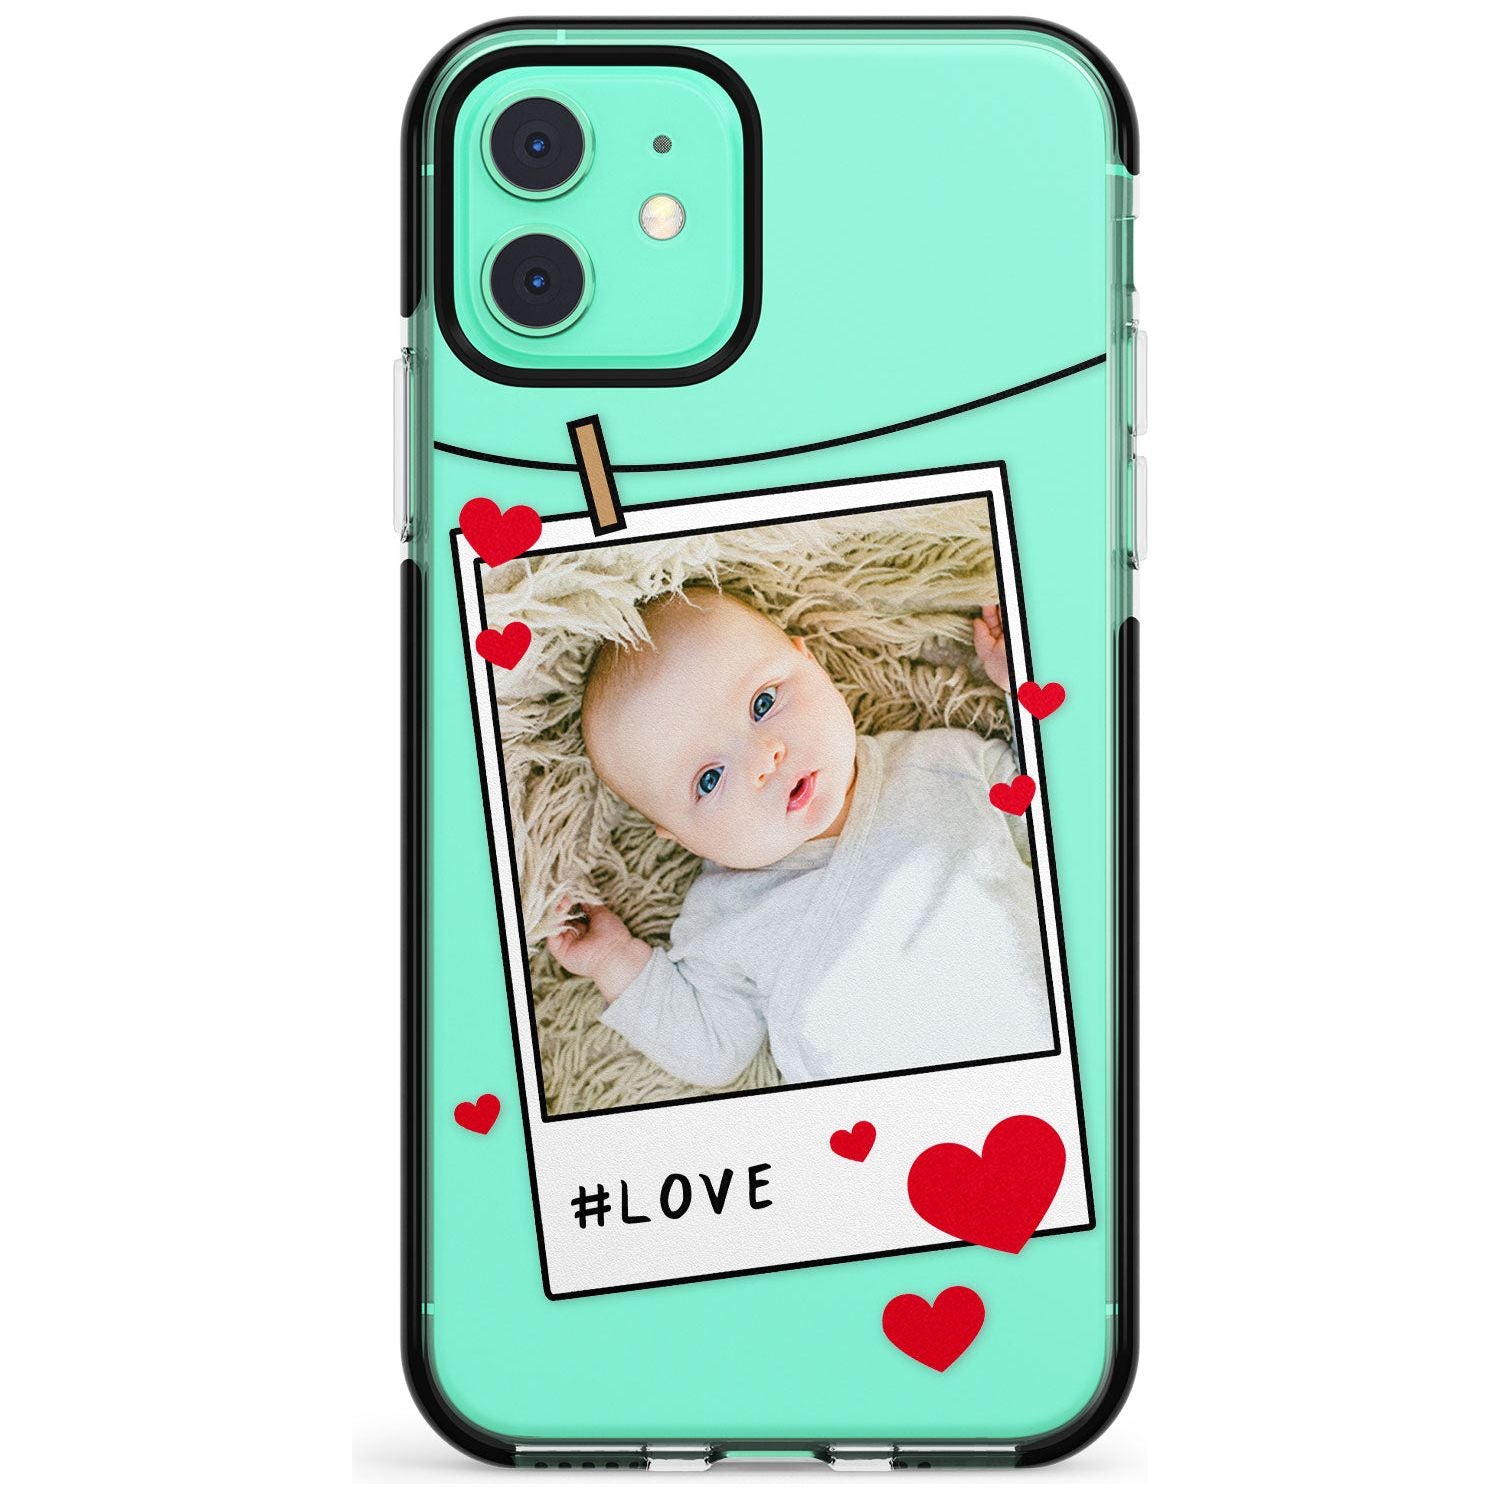 Love Instant Film Pink Fade Impact Phone Case for iPhone 11 Pro Max